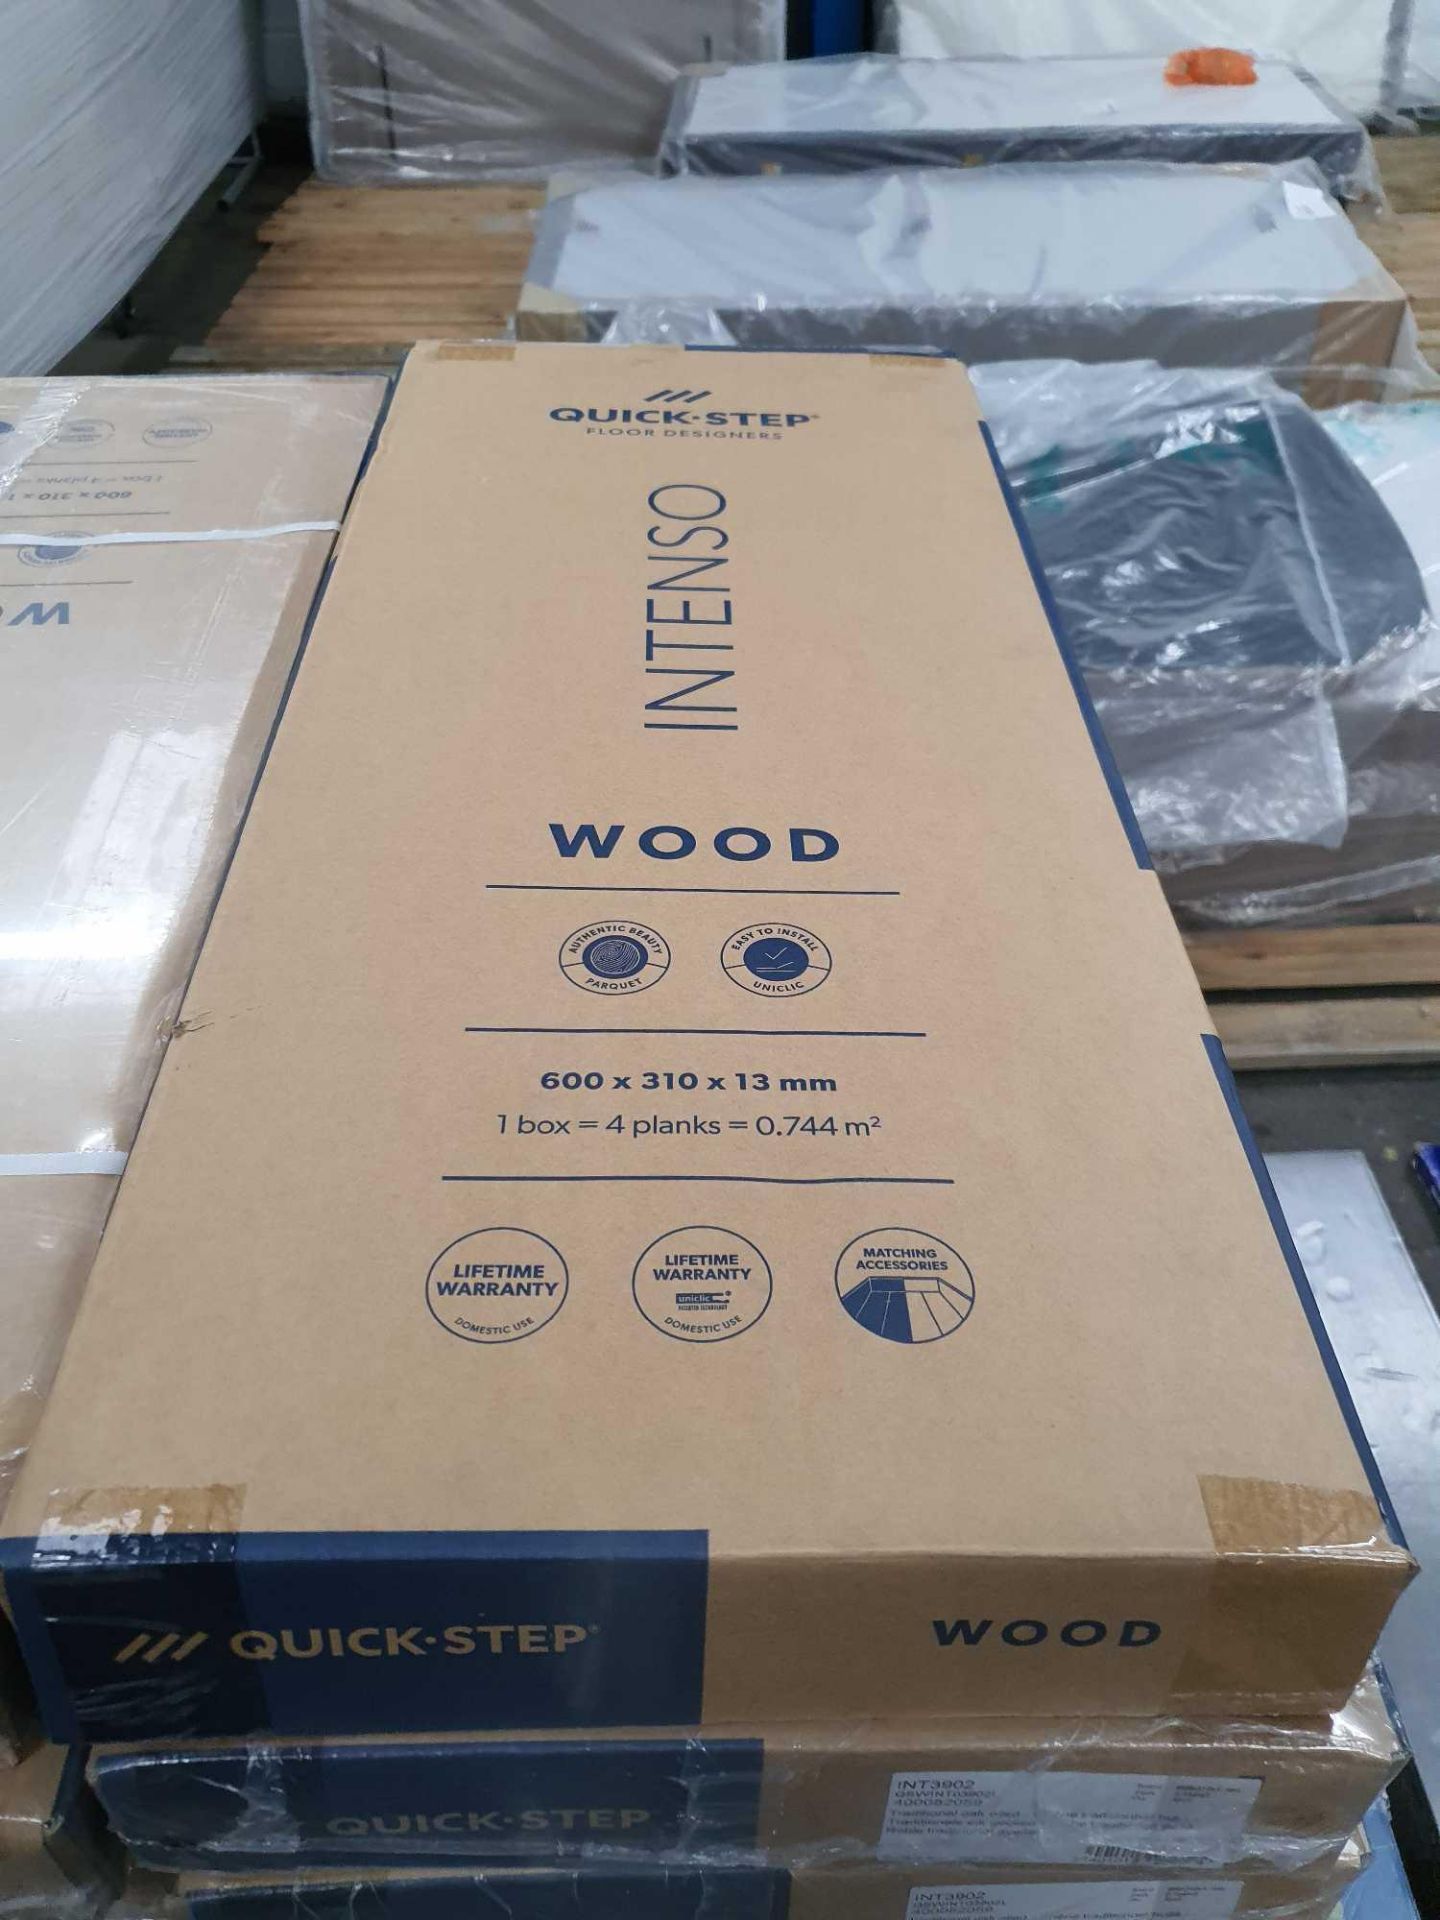 6 packs of Quick Step Intenso wood flooring 1 pack covers 0.744m2 - Image 5 of 5